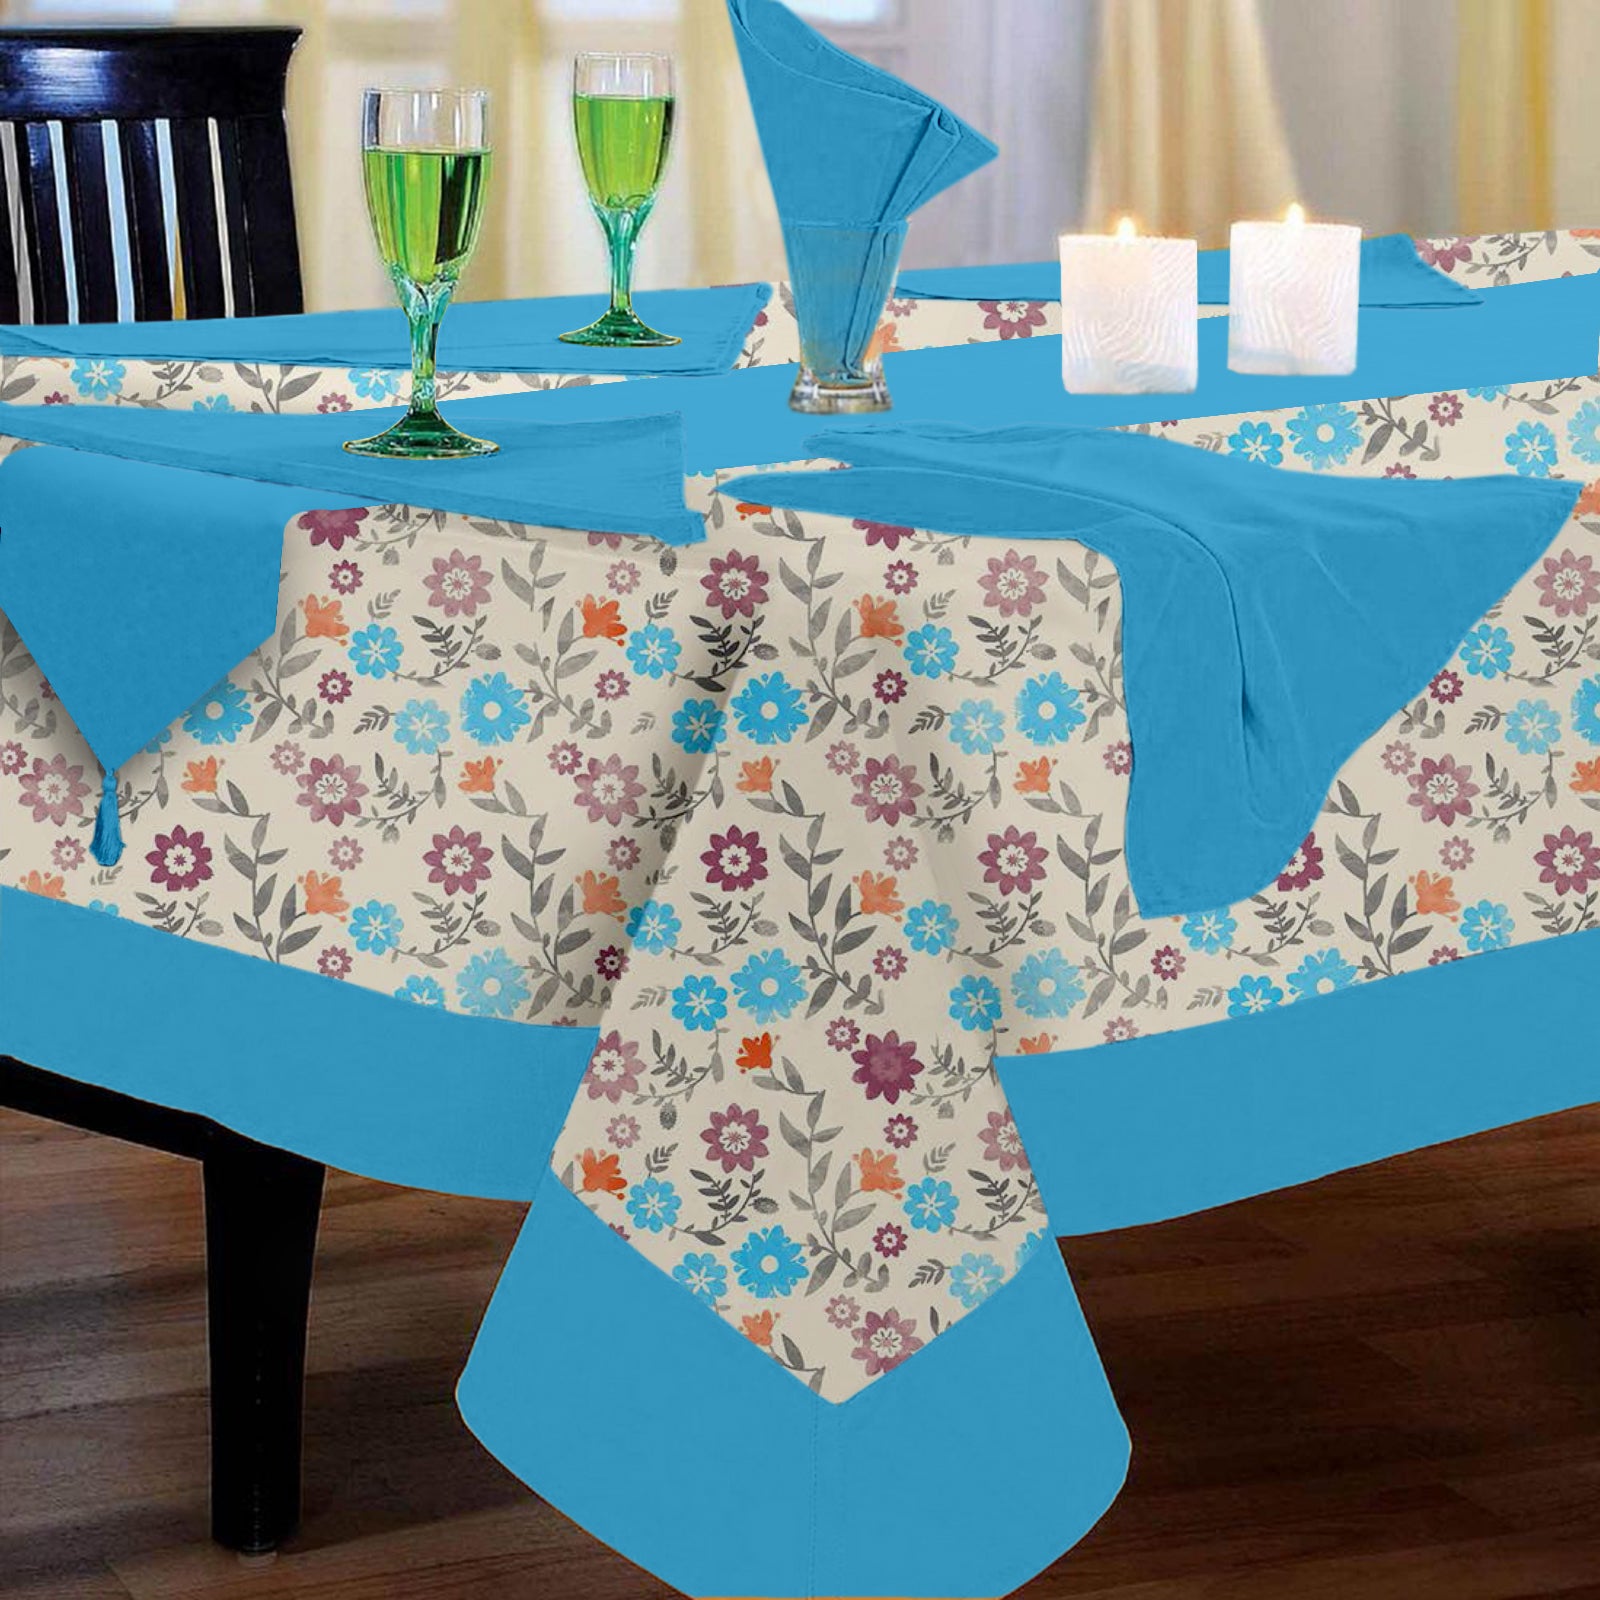 Lushomes dining table cover 6 seater set, Flower Printed 6 Seater Table Linen Set, Home Decor Items (1 Table Cloth 60 x 90 inches + 1 Runner in Size 12x102 Inches+ 6 Napkins in Size 17x17 Inches)